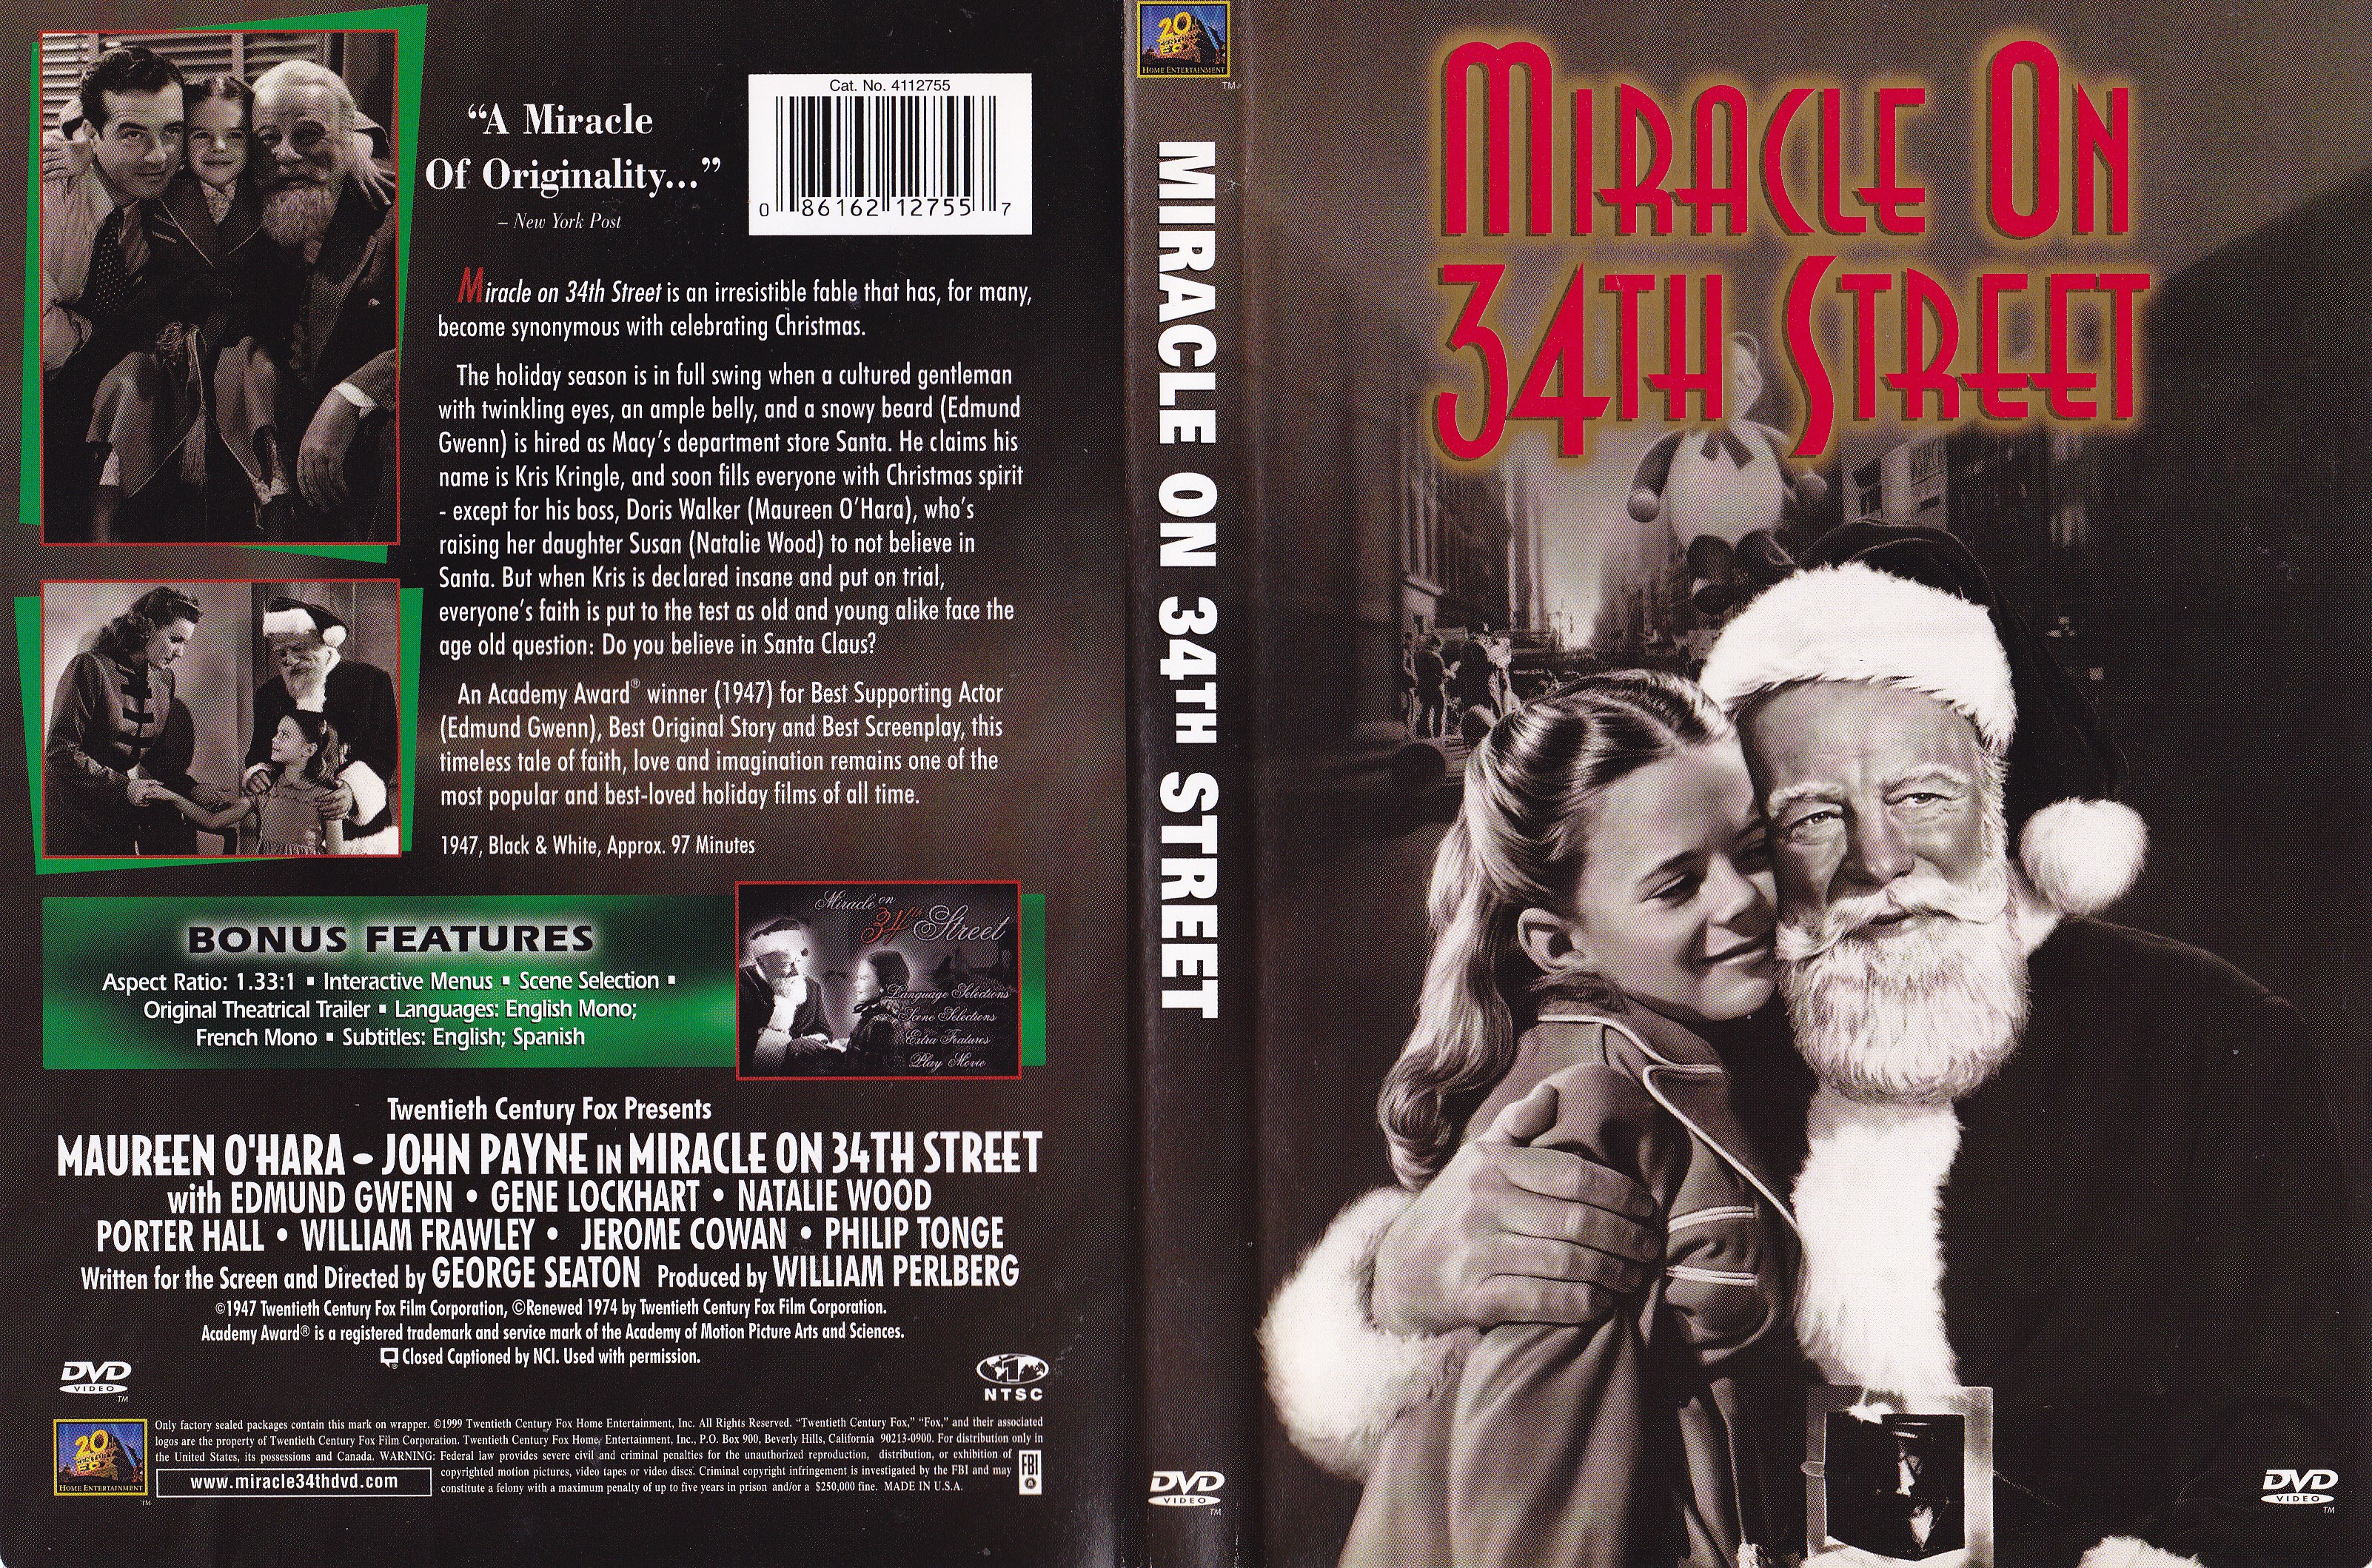 Jaquette DVD Miracle on 34th street - Miracle sur la 34 me rue (1943) (Canadienne)